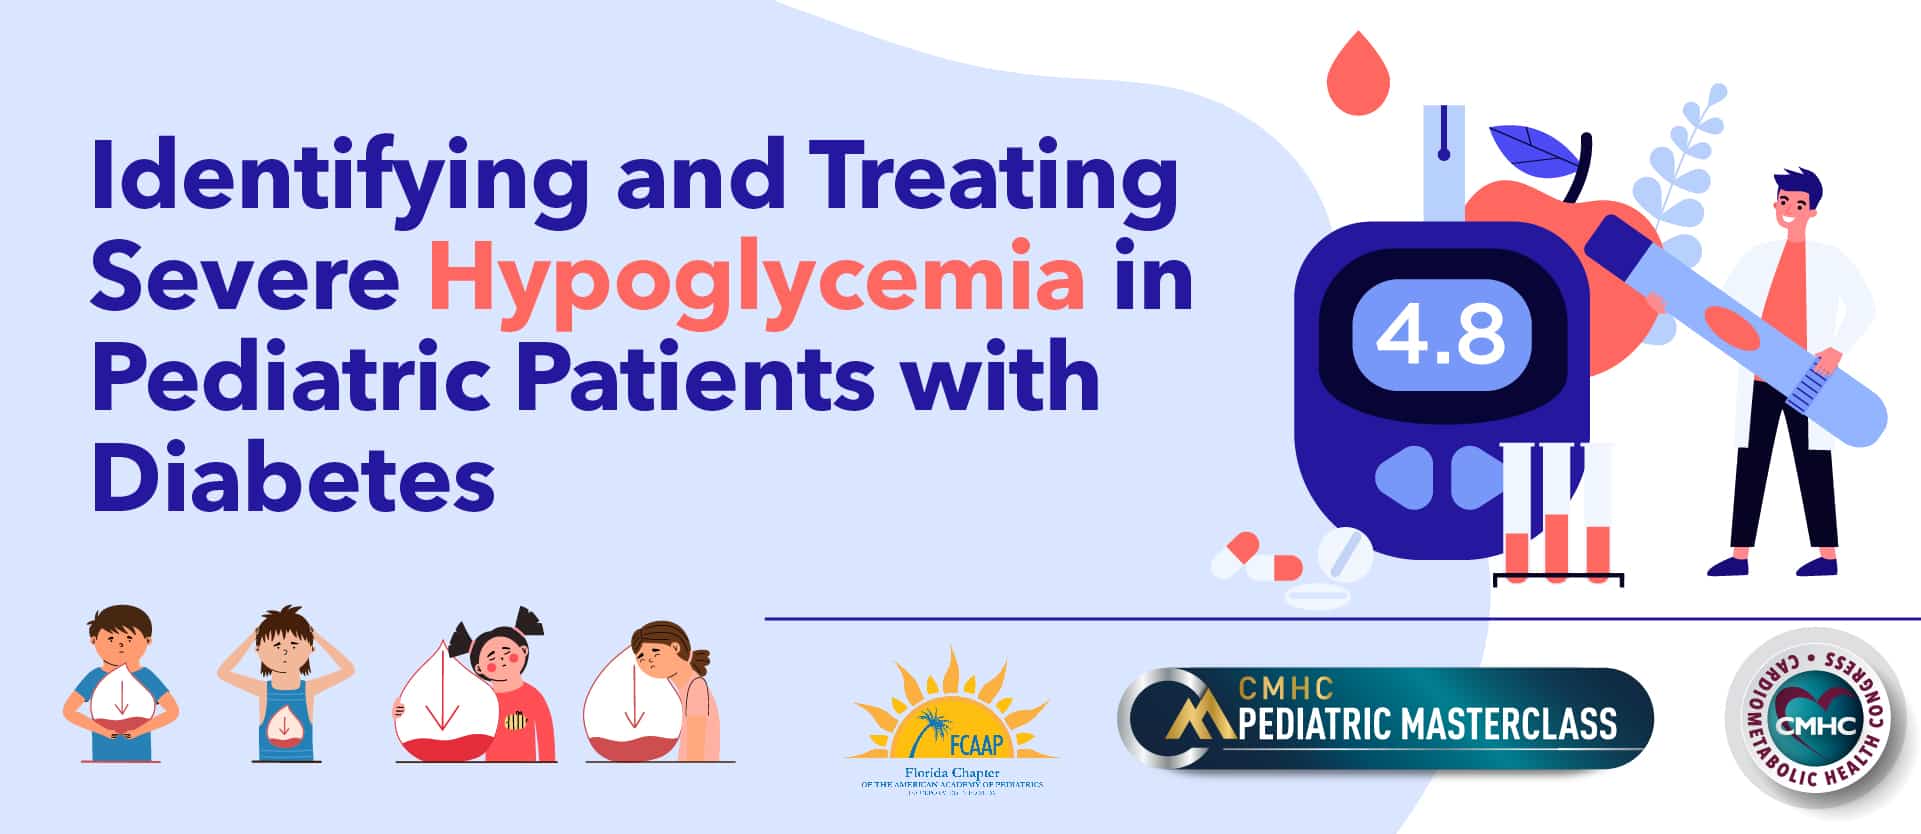 Identifying and Treating Severe Hypoglycemia in Pediatric Patients with Diabetes